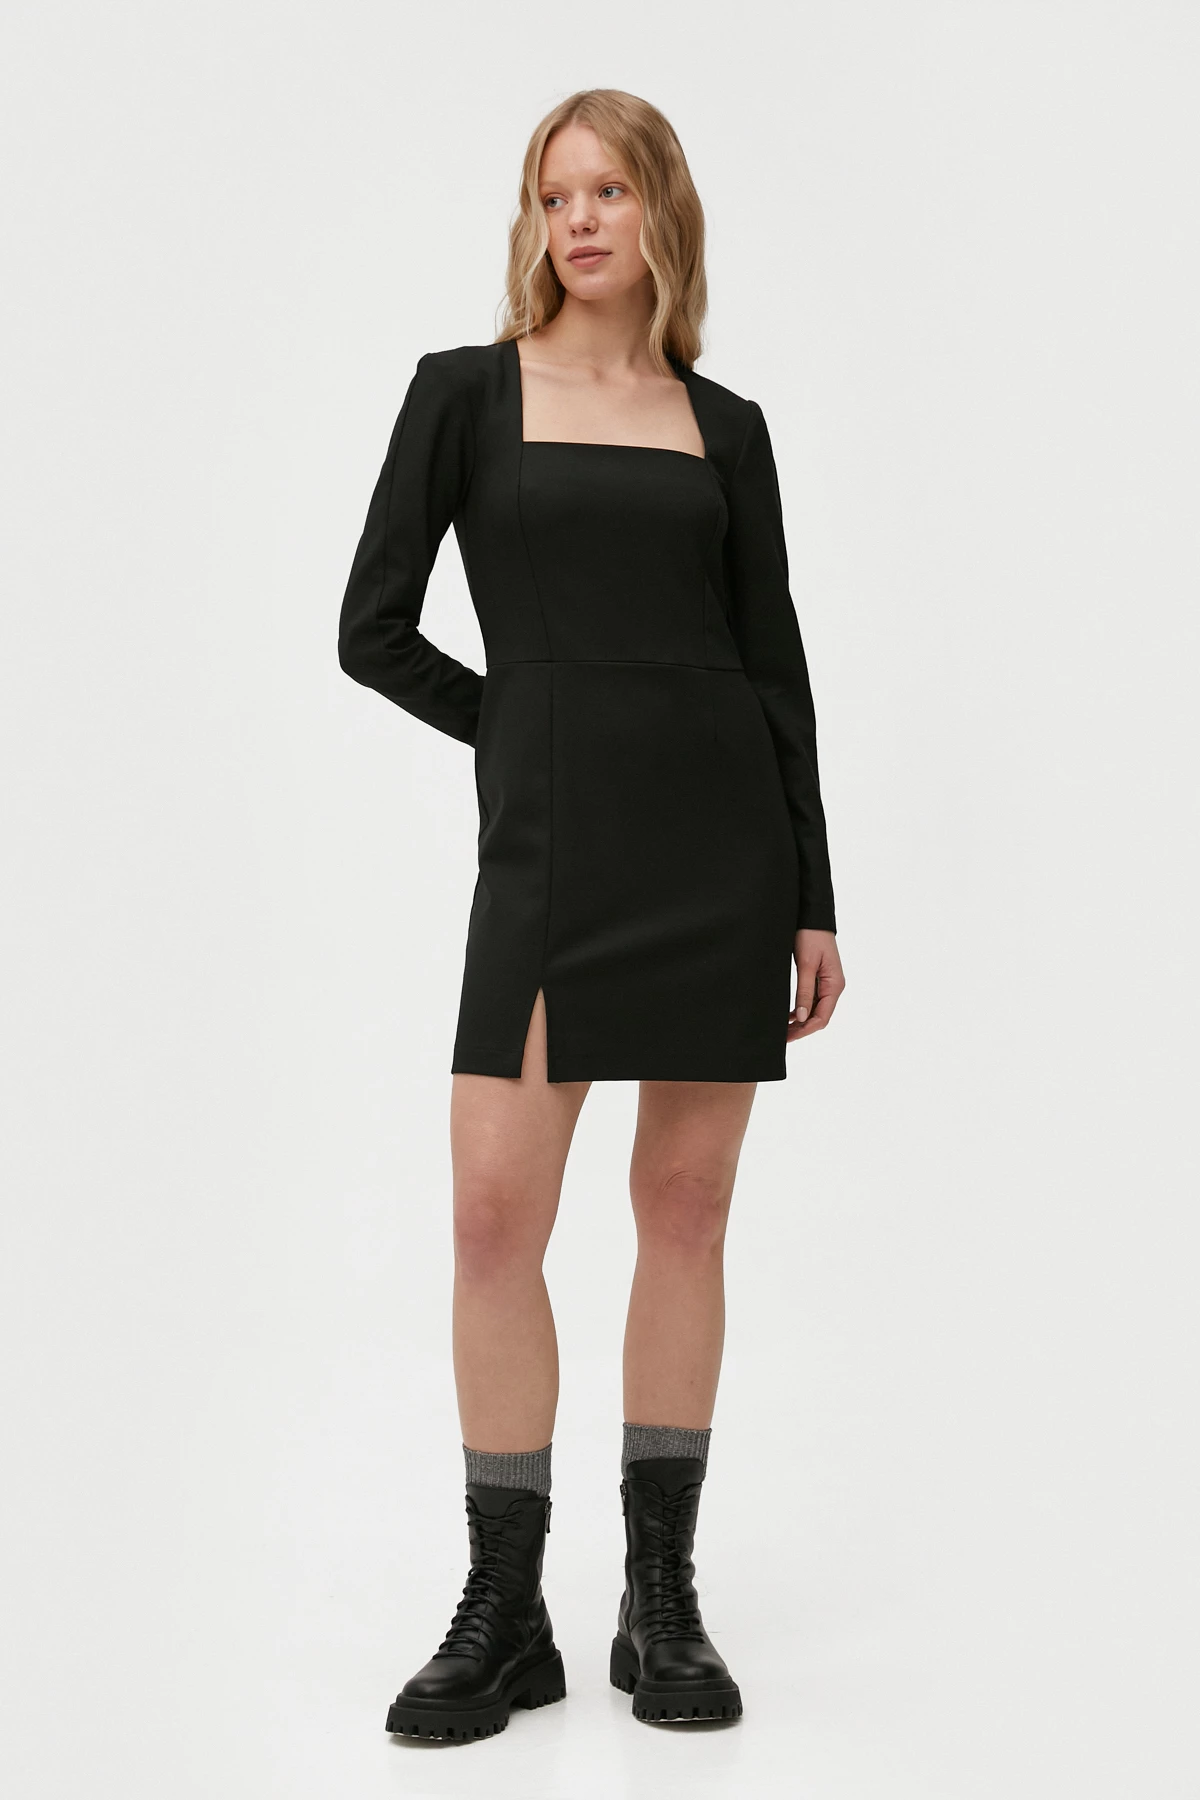 Black mini dress made of suiting fabric with wool, photo 2